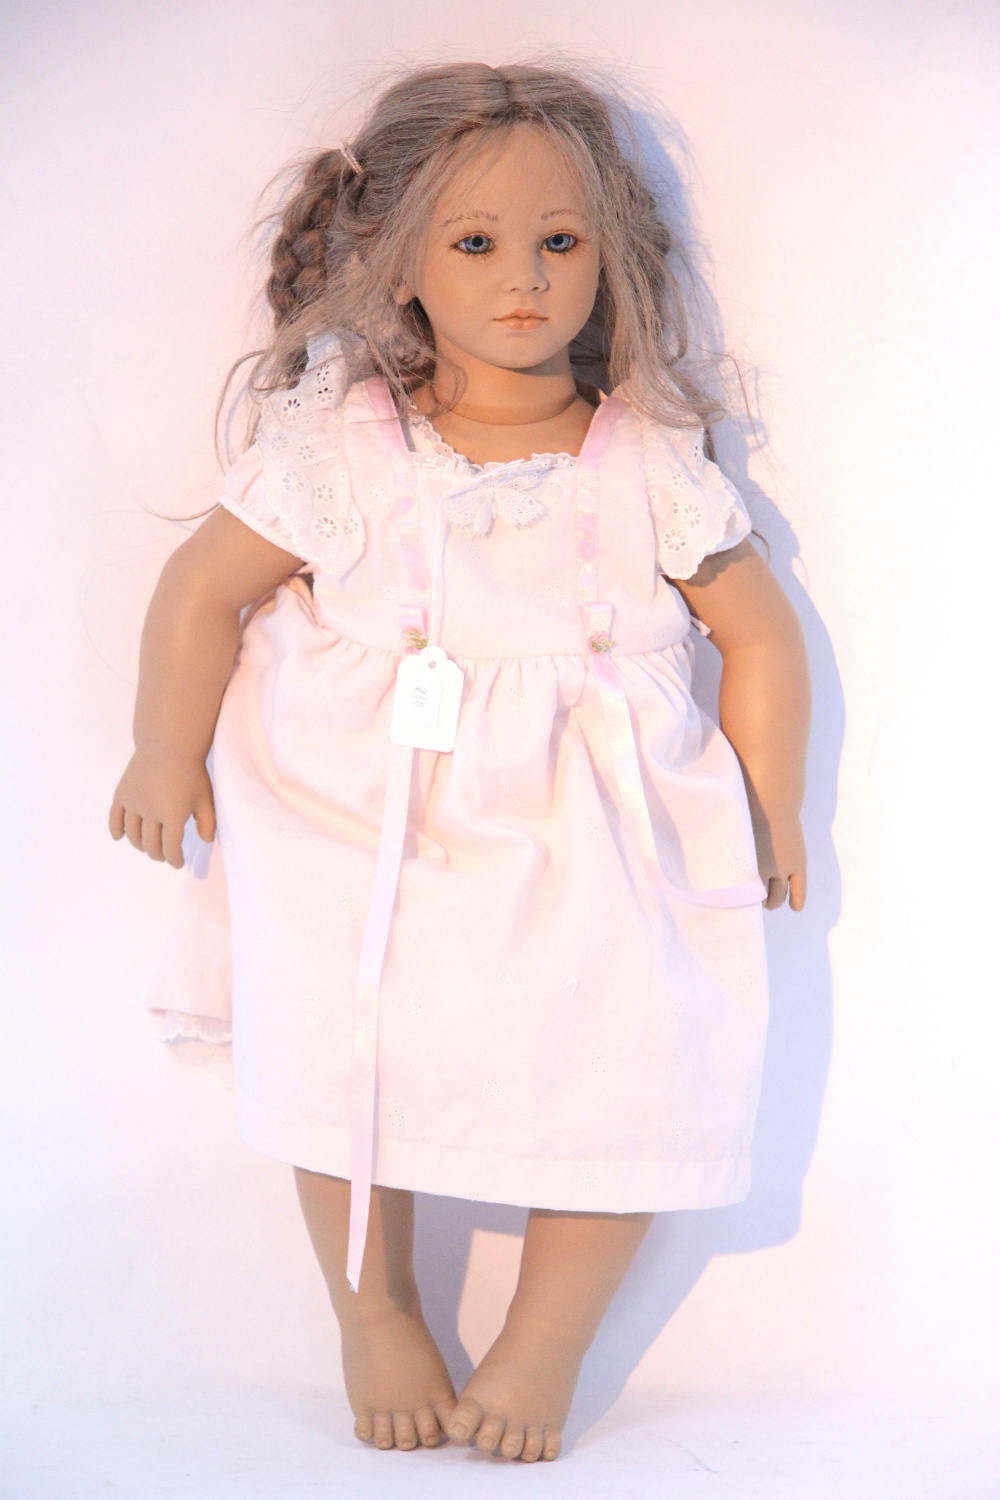 Another Annette Himstedt girl doll “Fiene”, 25" tall, dressed.